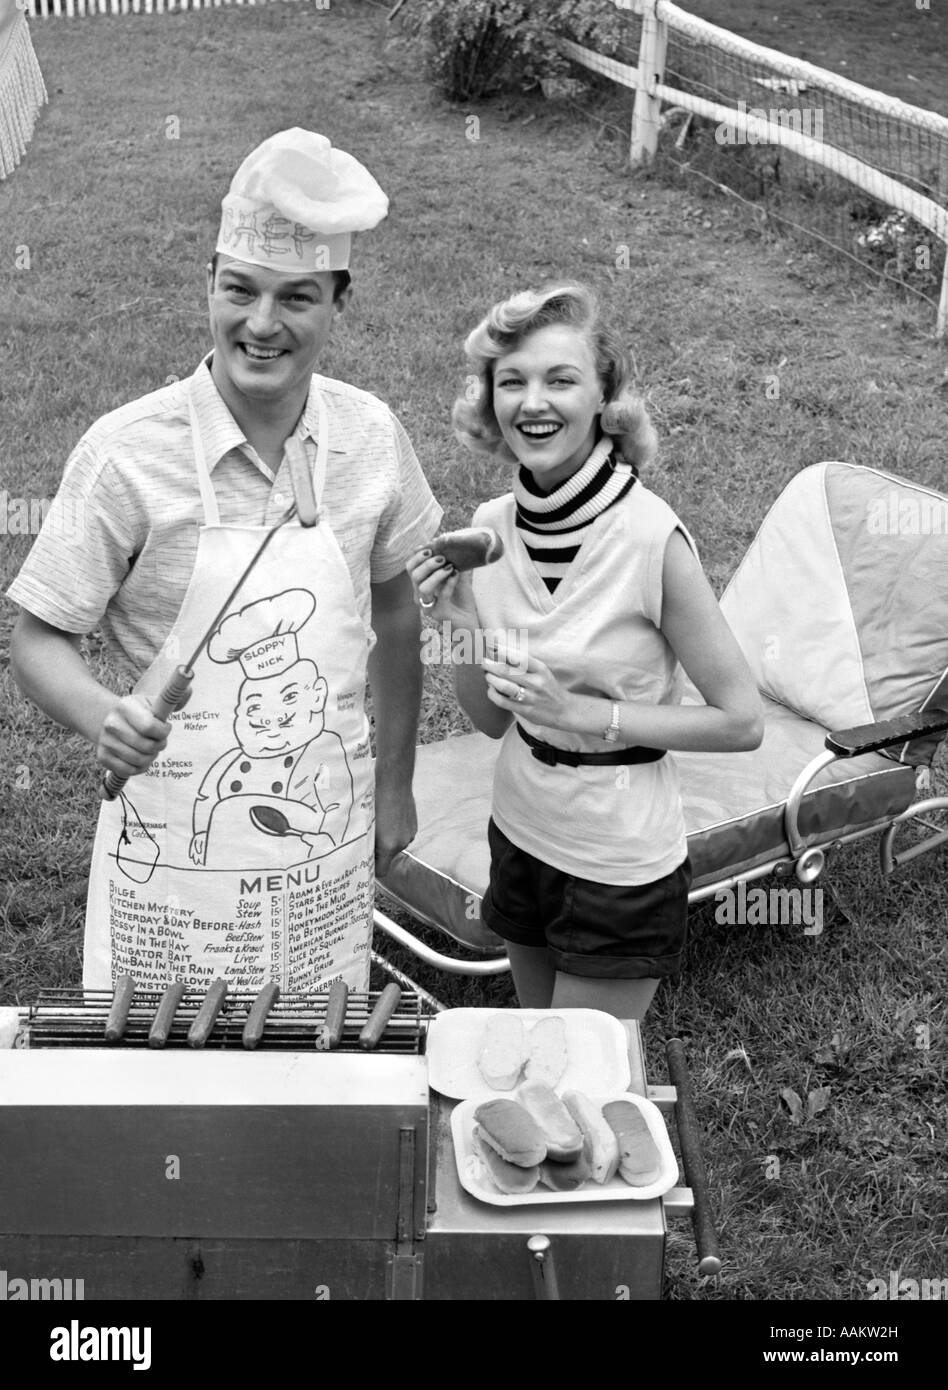 1950s COUPLE BACKYARD GRILL COOK HOT DOGS MAN WEARING APRON TOQUE & SKEWERED HOT DOG Stock Photo